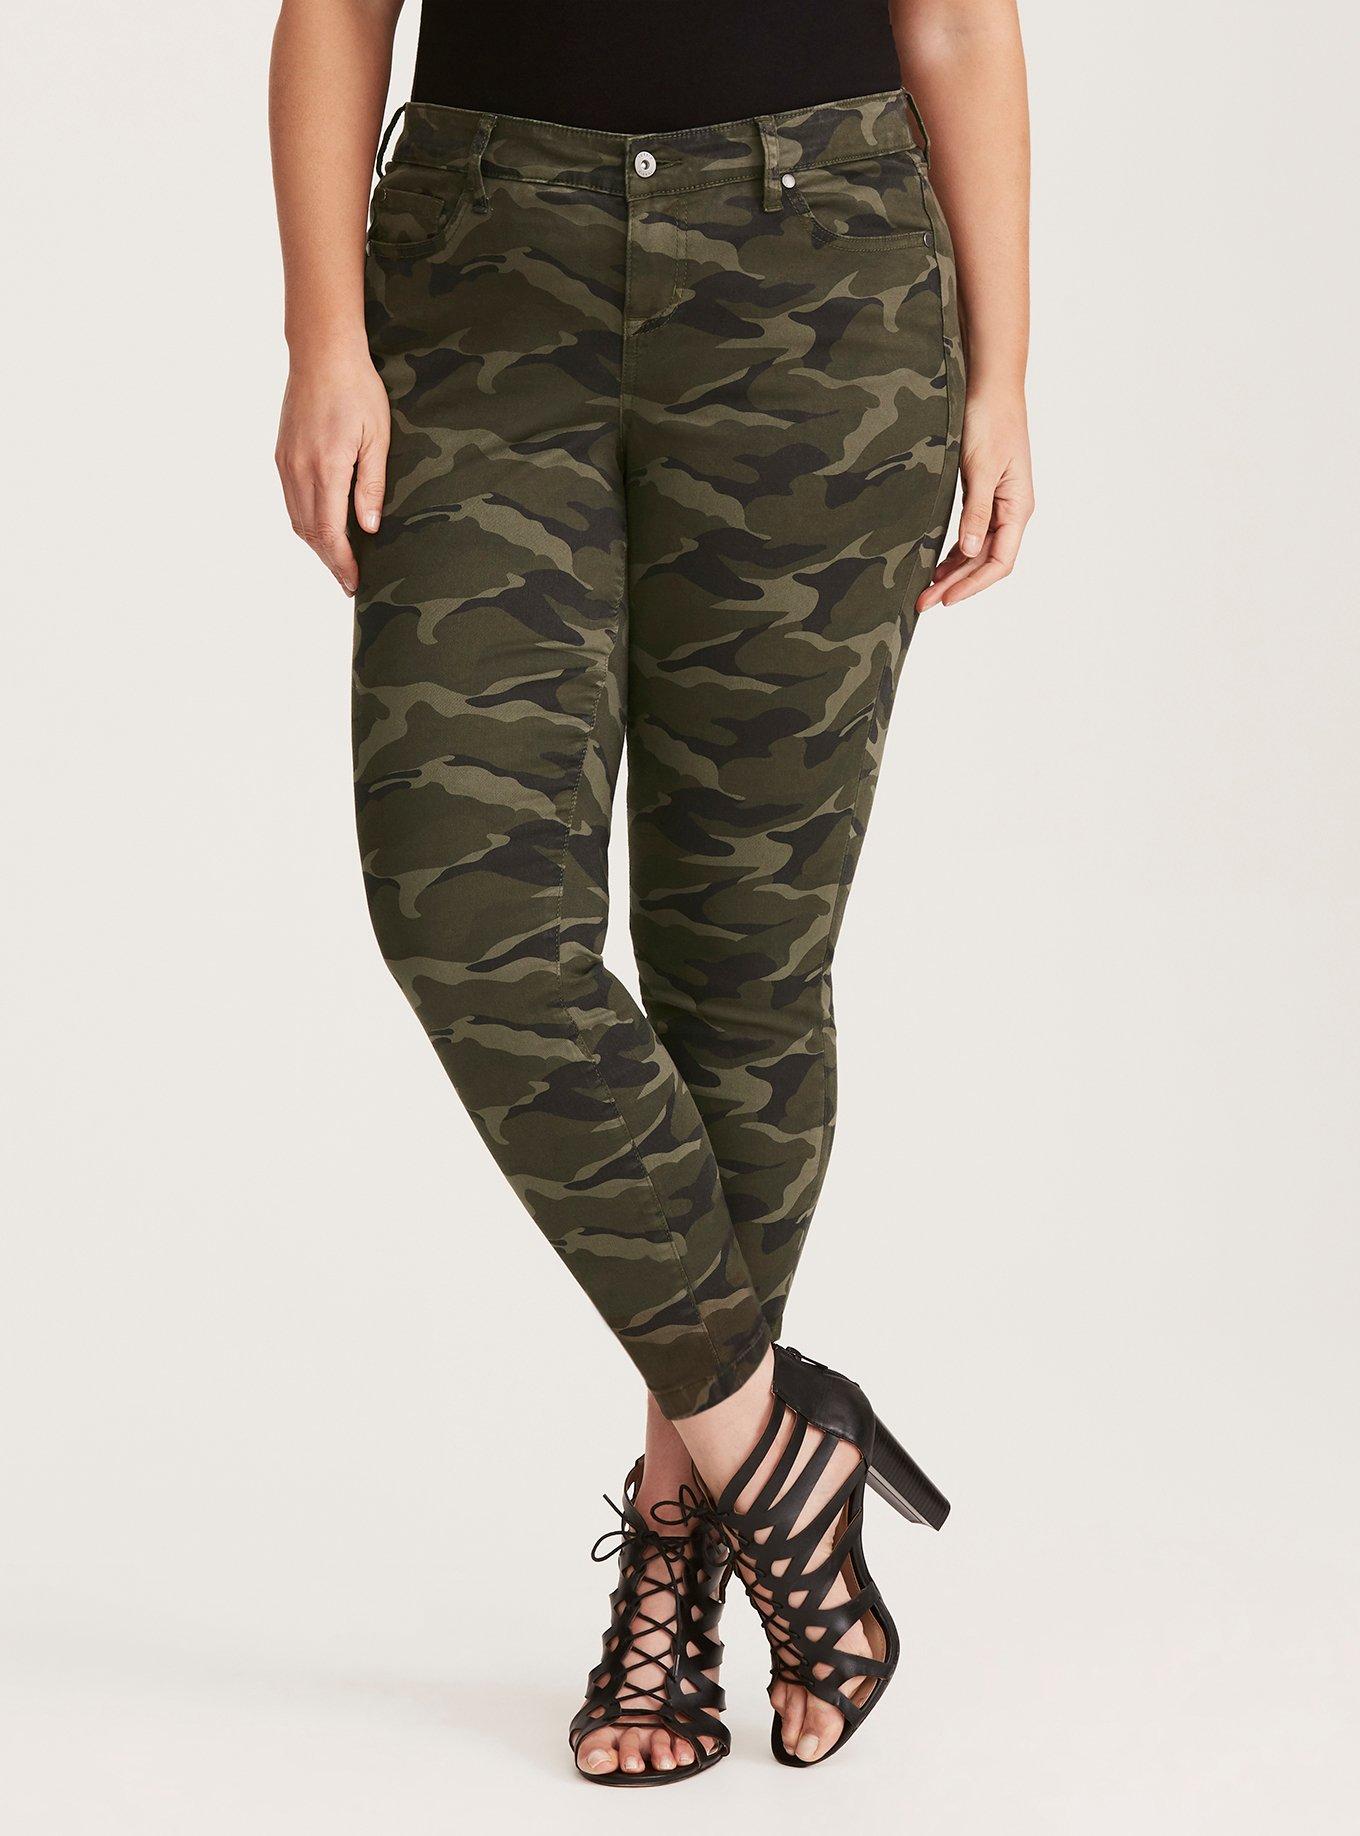 I need me some camo capris for the summer! I will pair mine with